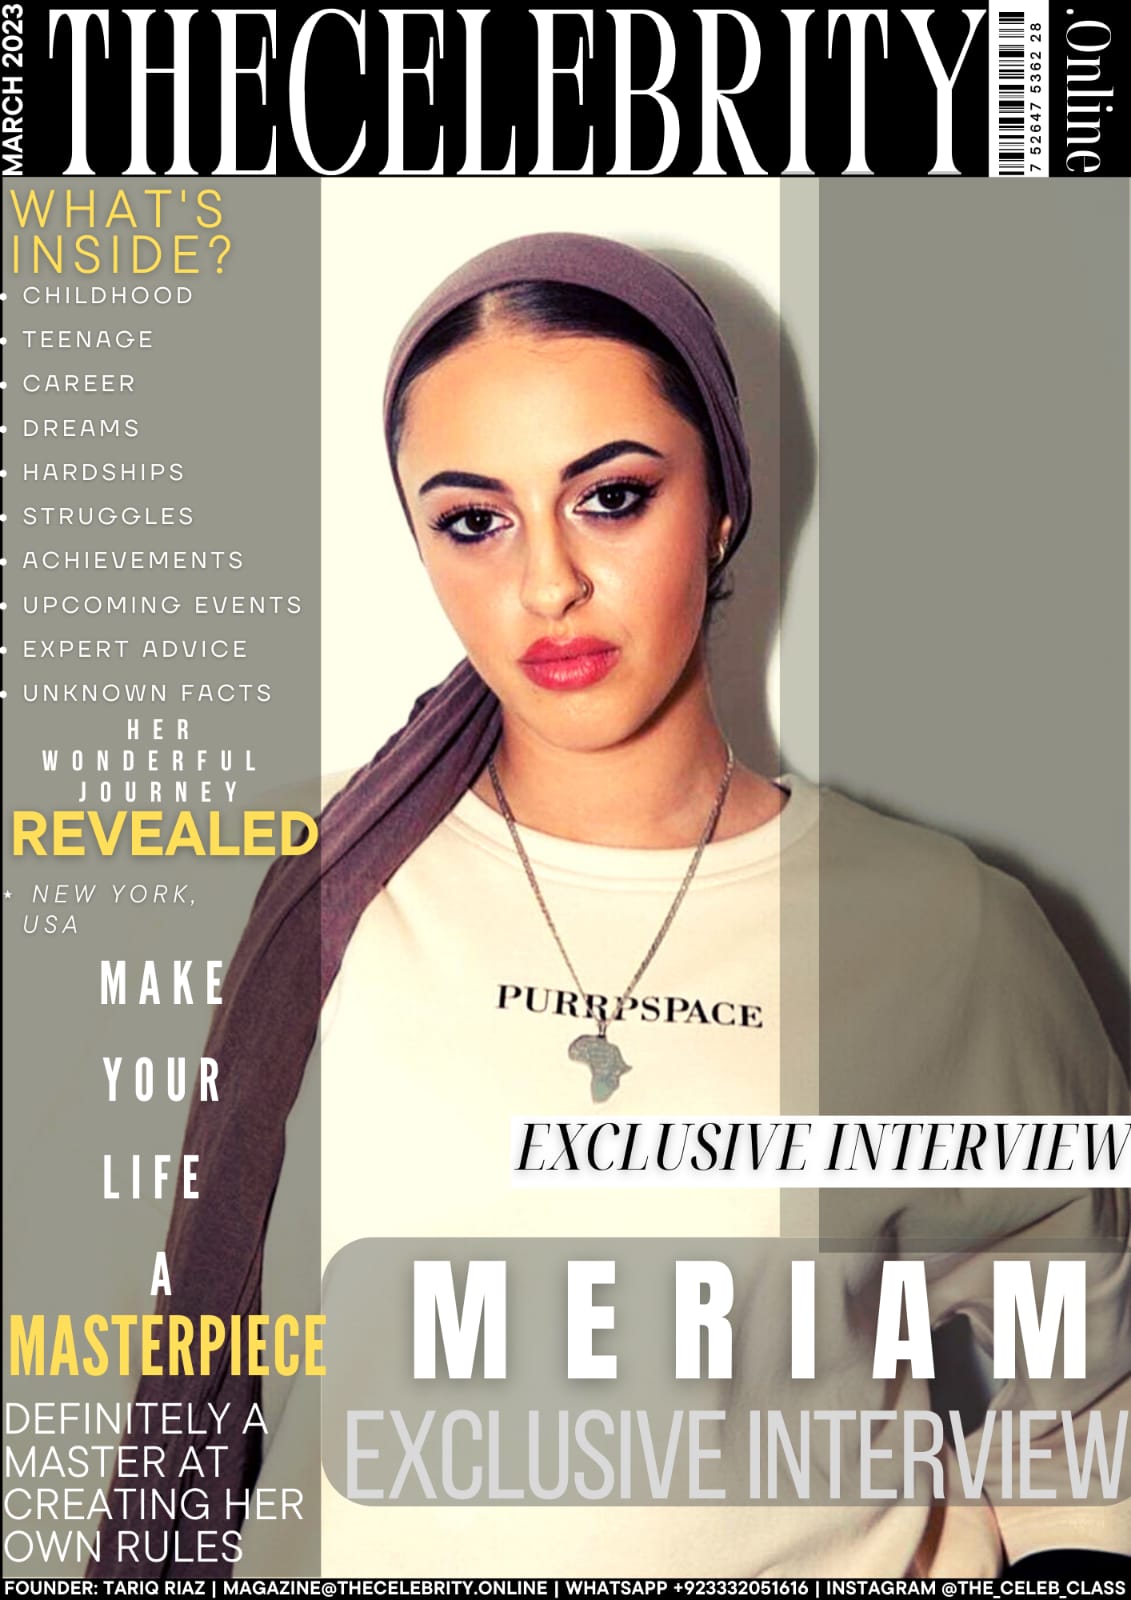 Meriam Exclusive Interview – ‘Stay Focussed And Don’t Let Others Affect You’